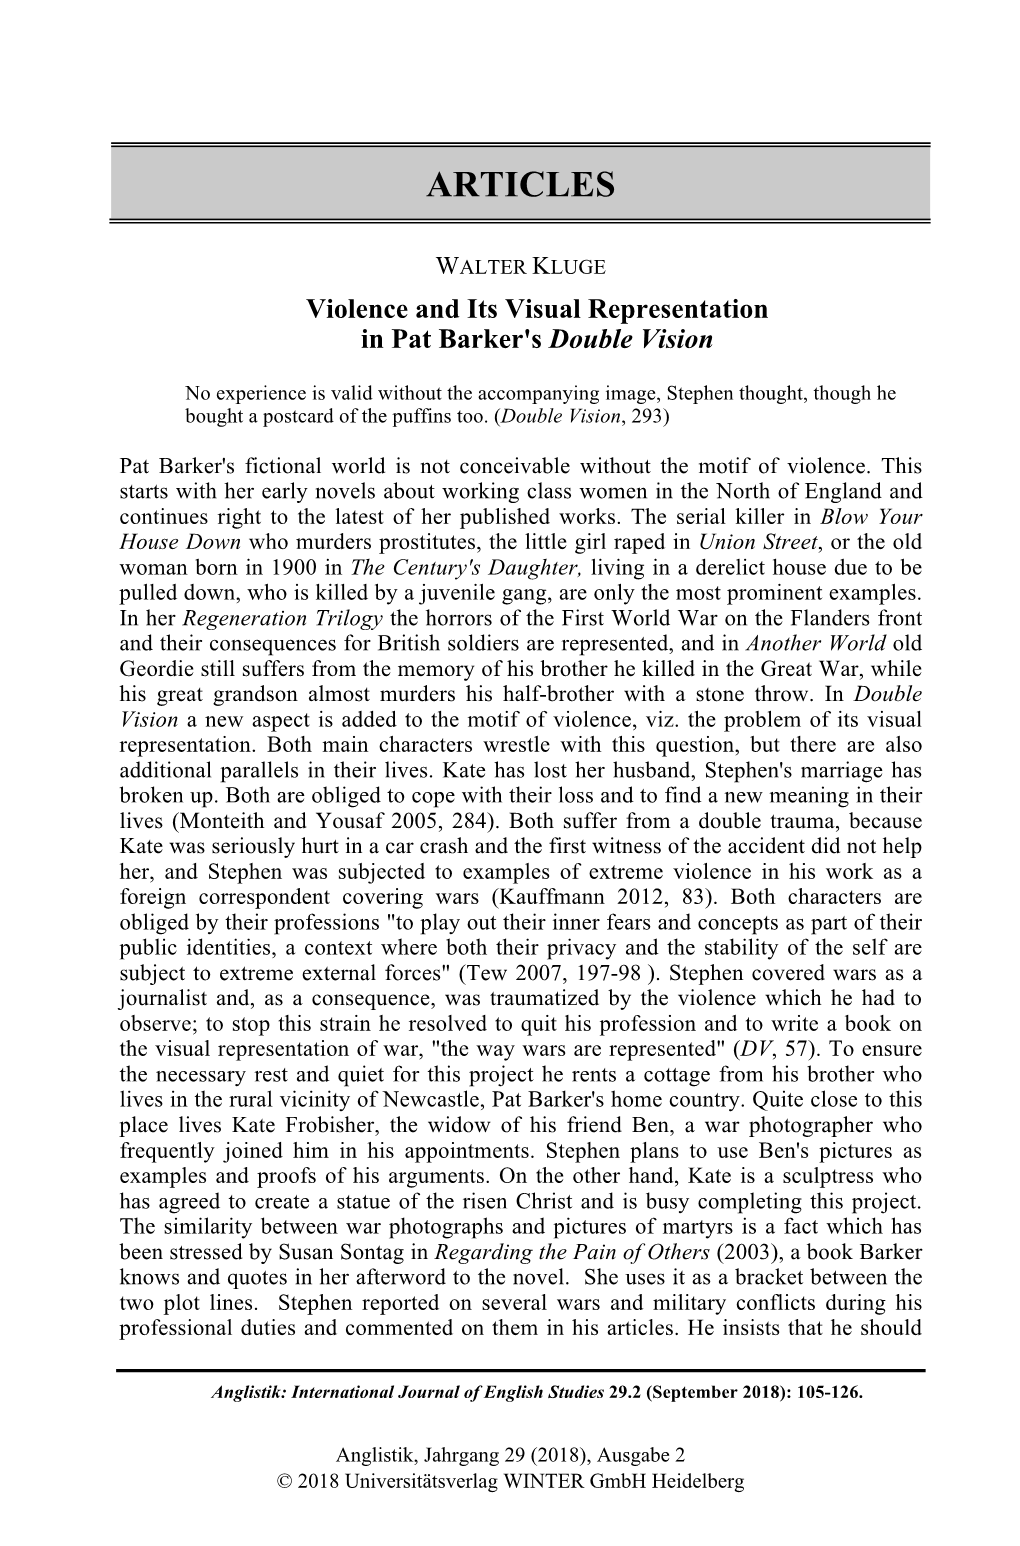 Violence and Its Visual Representation in Pat Barker's Double Vision